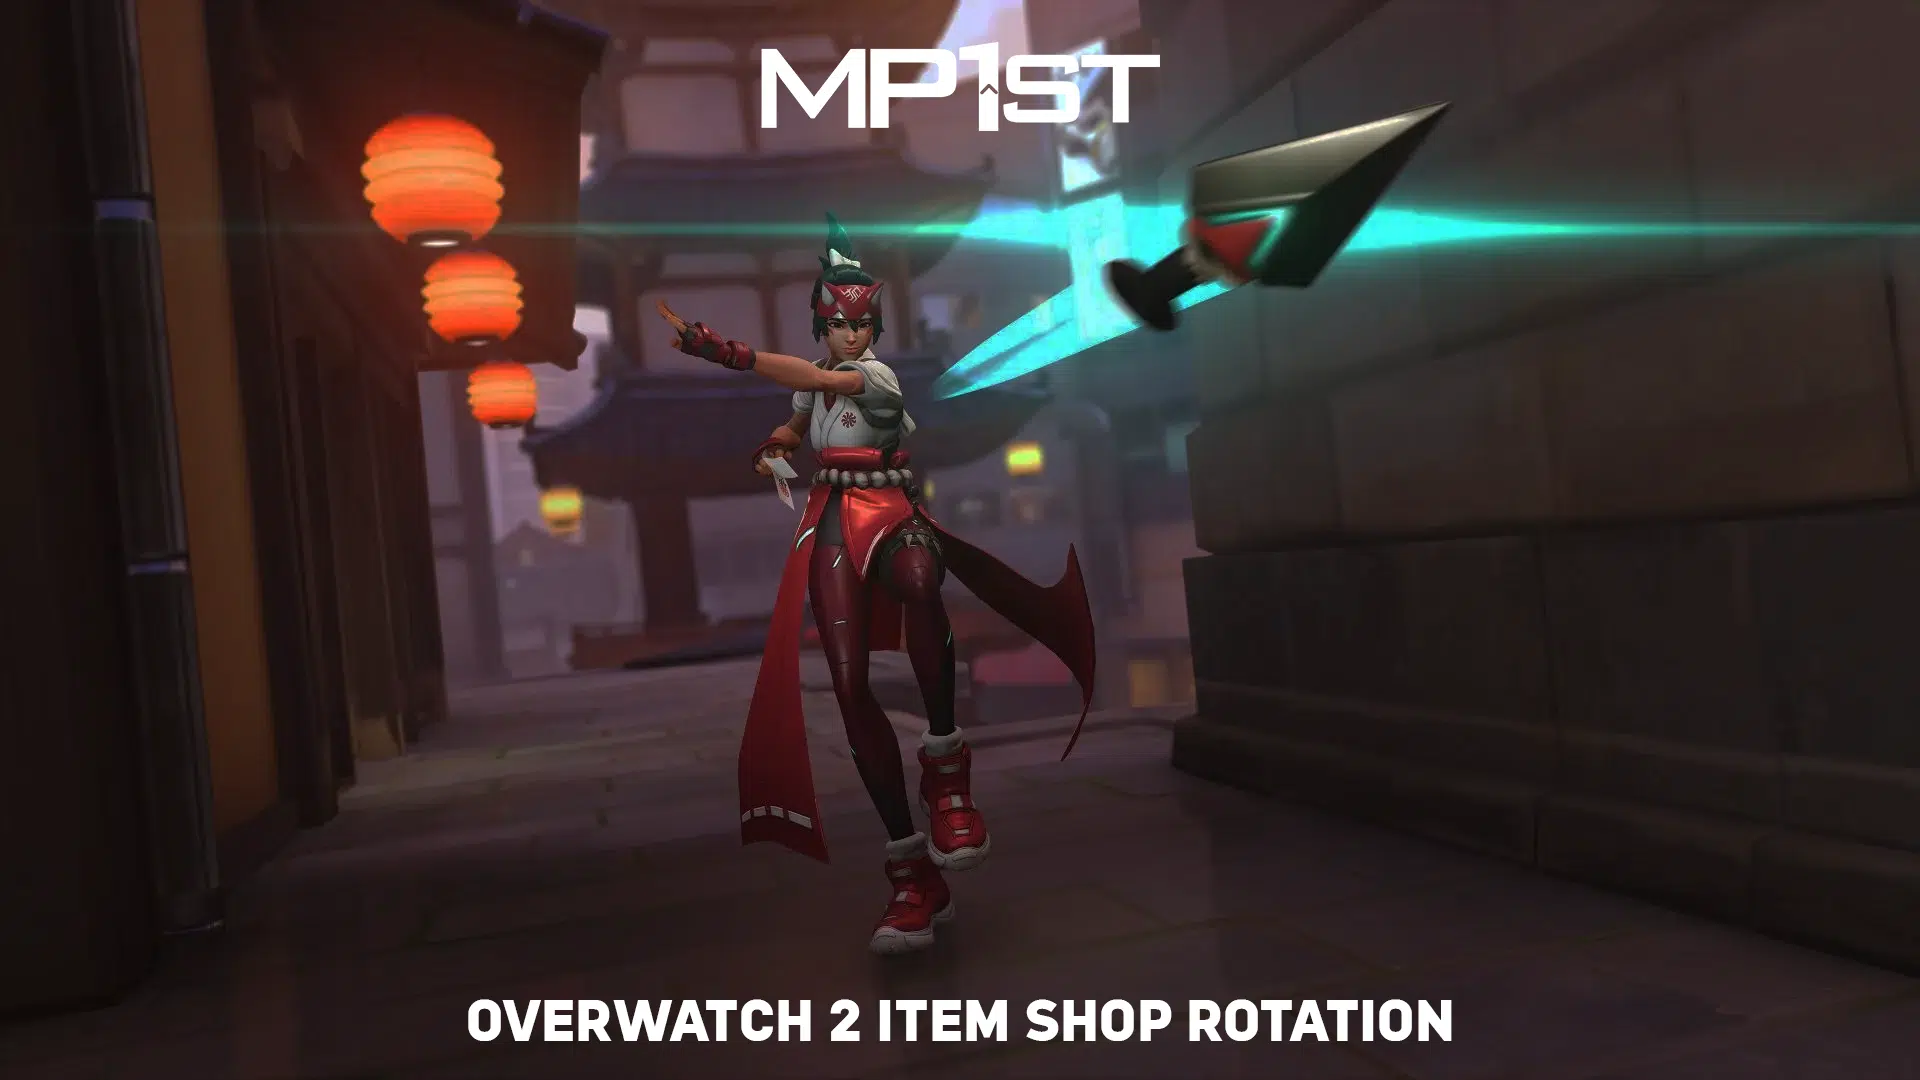 Overwatch 2 Item Shop Rotation for March 26